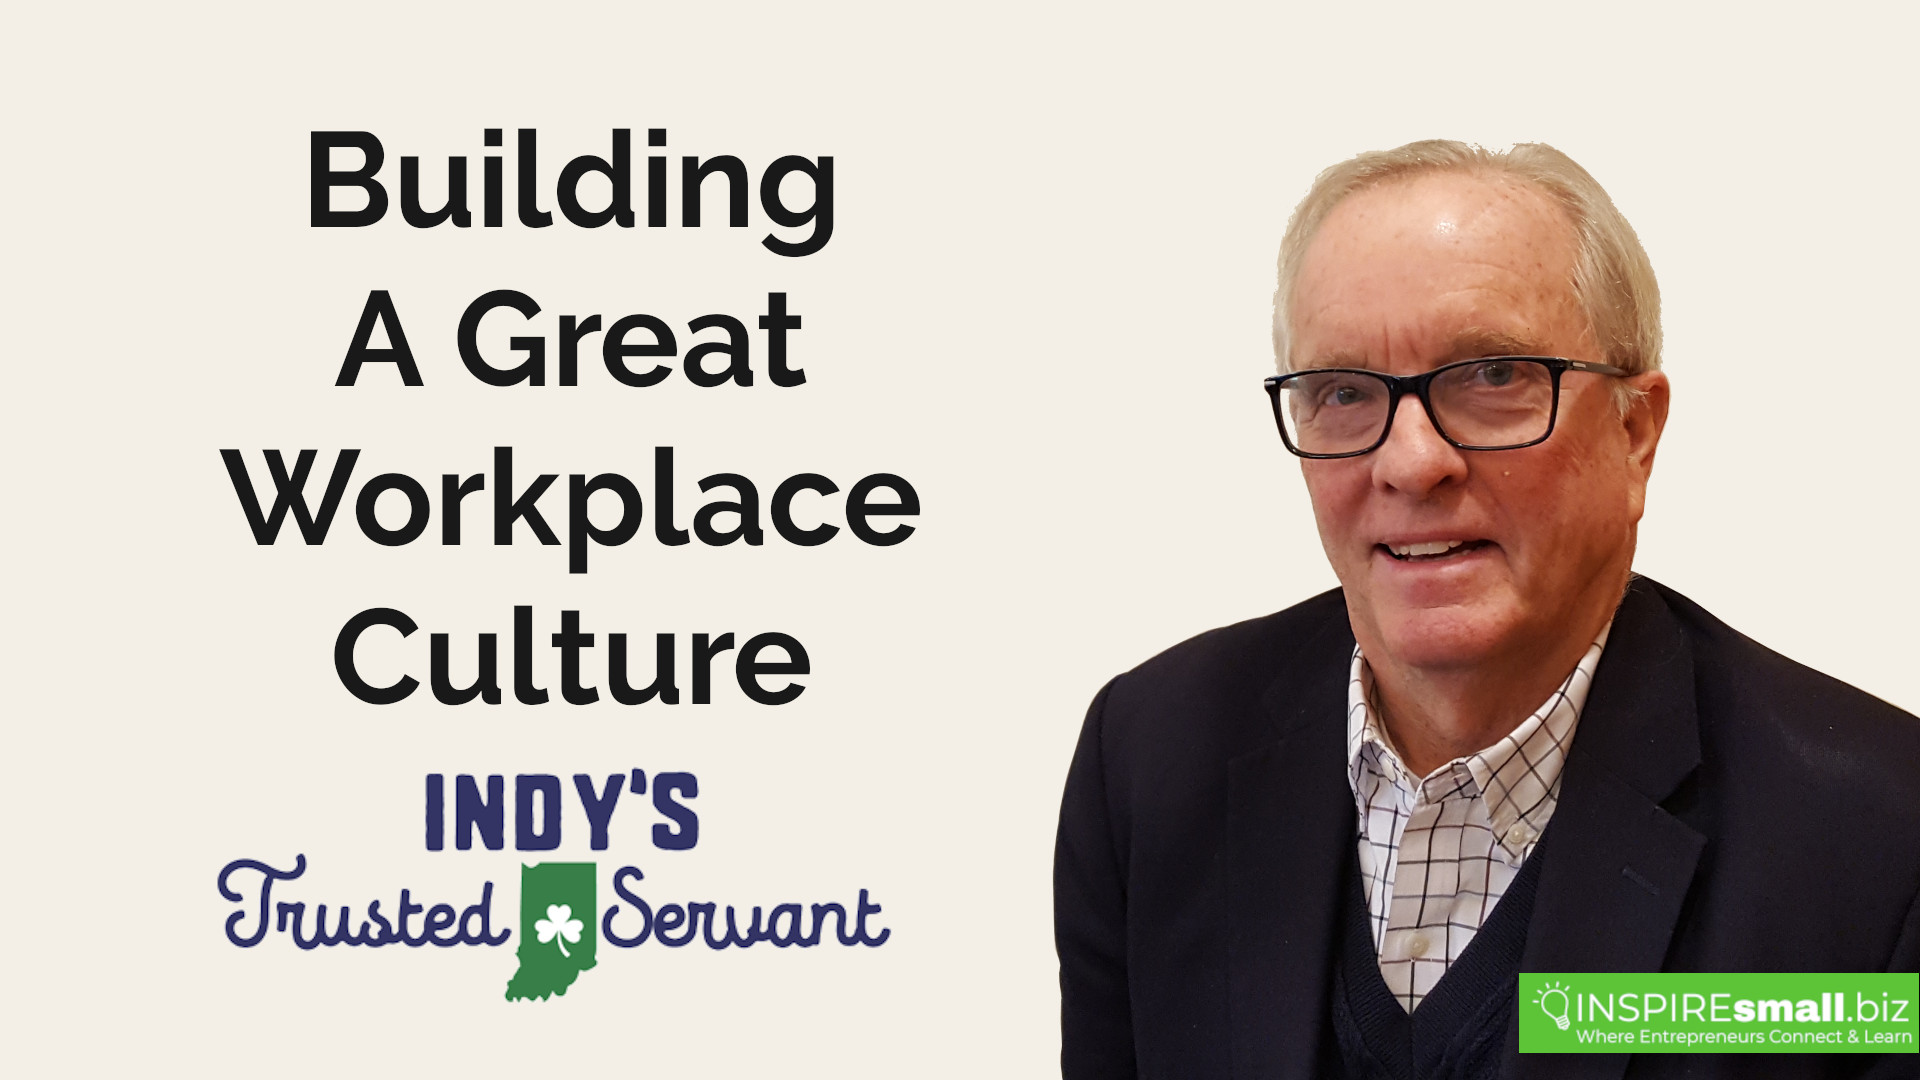 Building A Great Workplace Culture